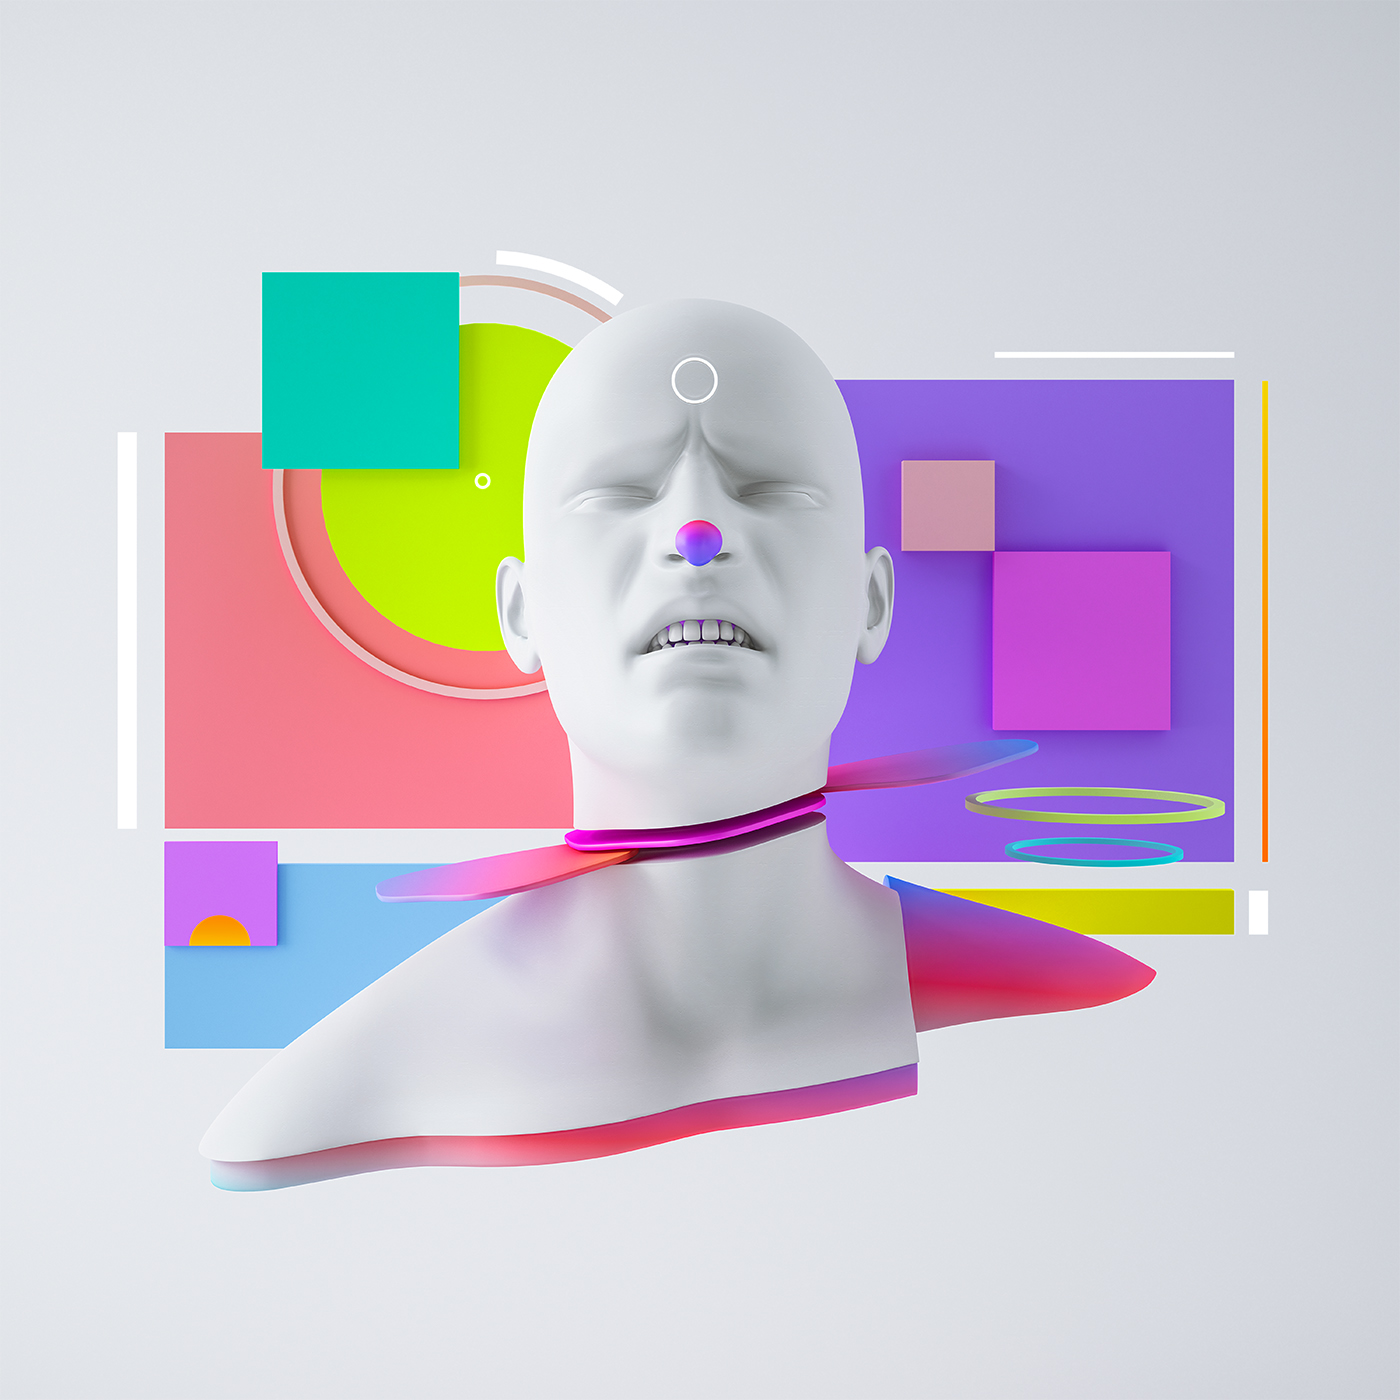 surreal design ILLUSTRATION  3D abstract Render vray 3ds max photoshop gradients